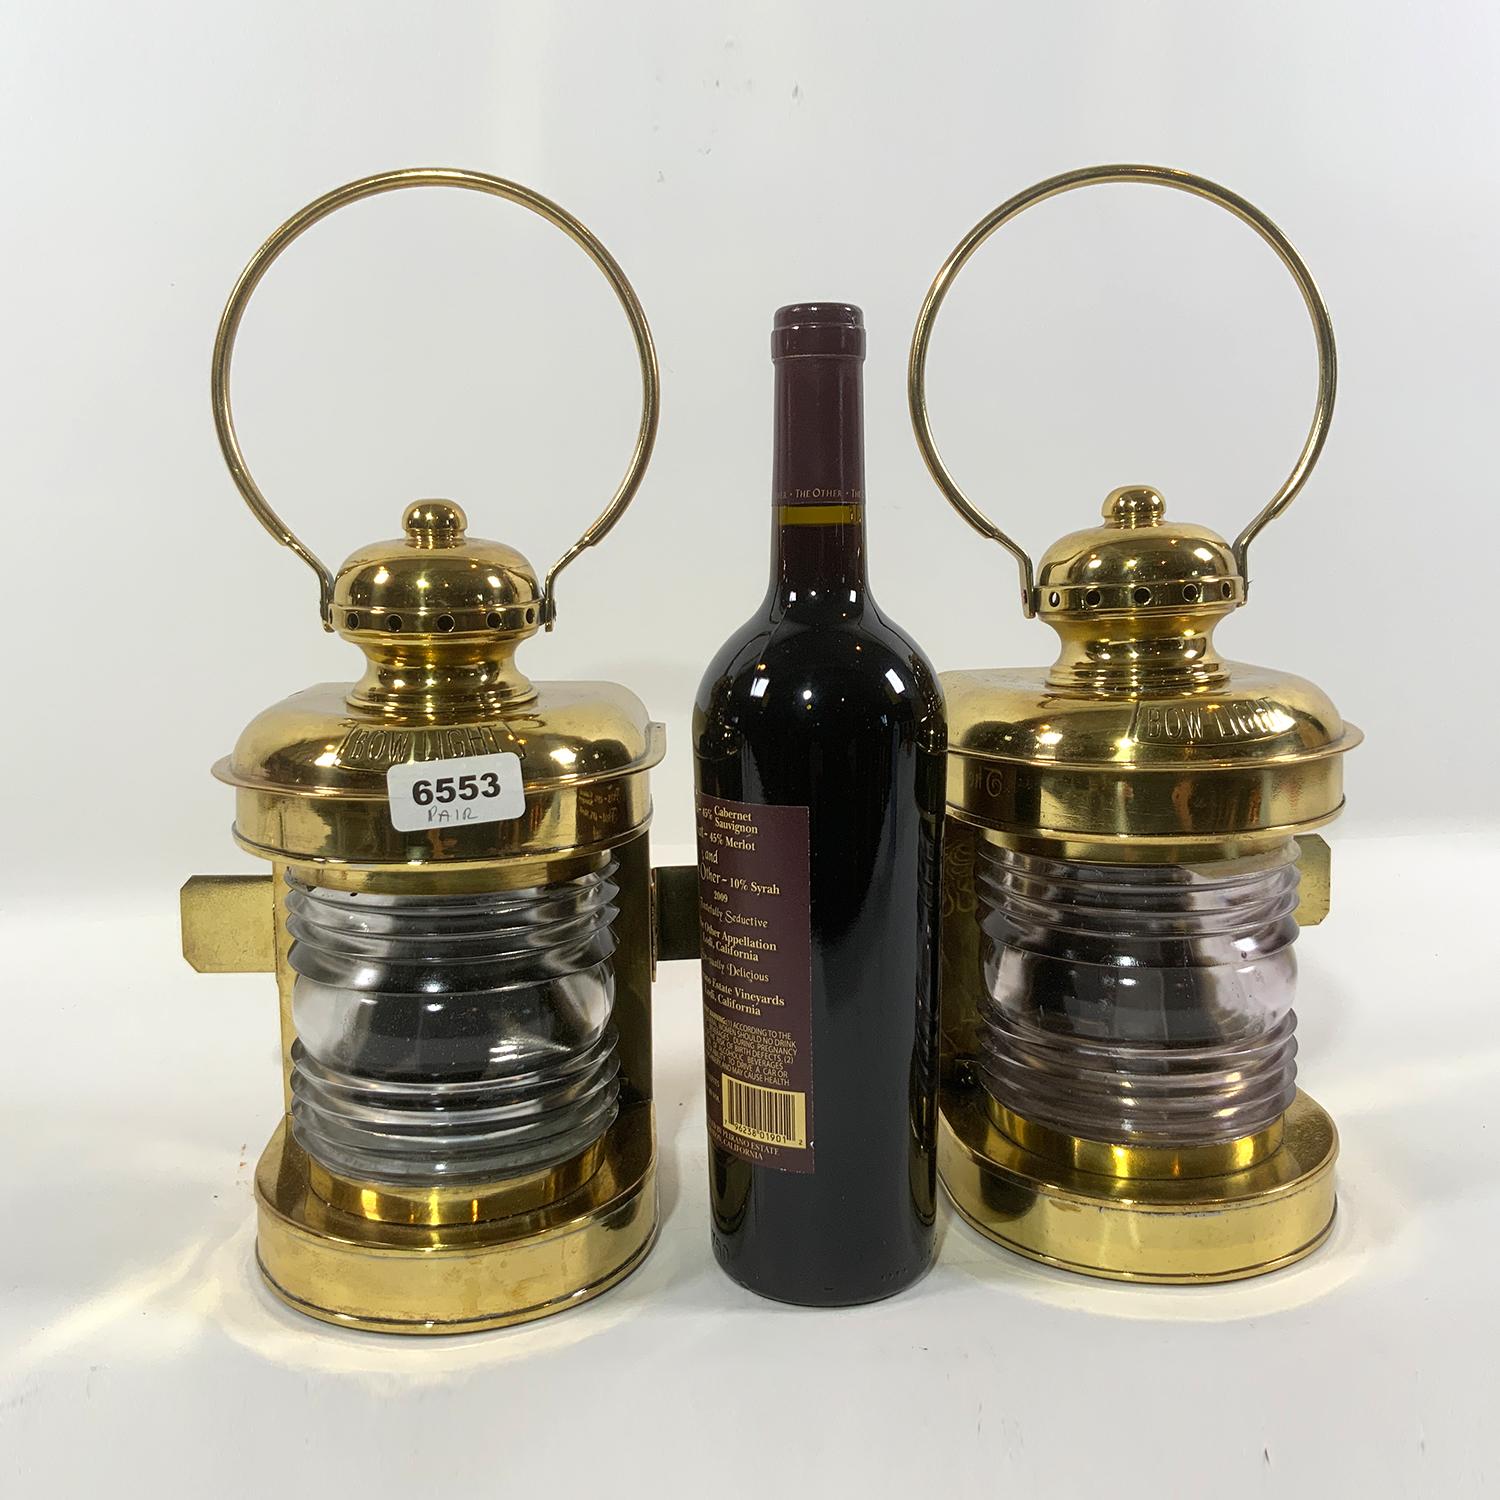 Pair of lacquered yacht lanterns with Fresnel glass lenses. Each with a brass 